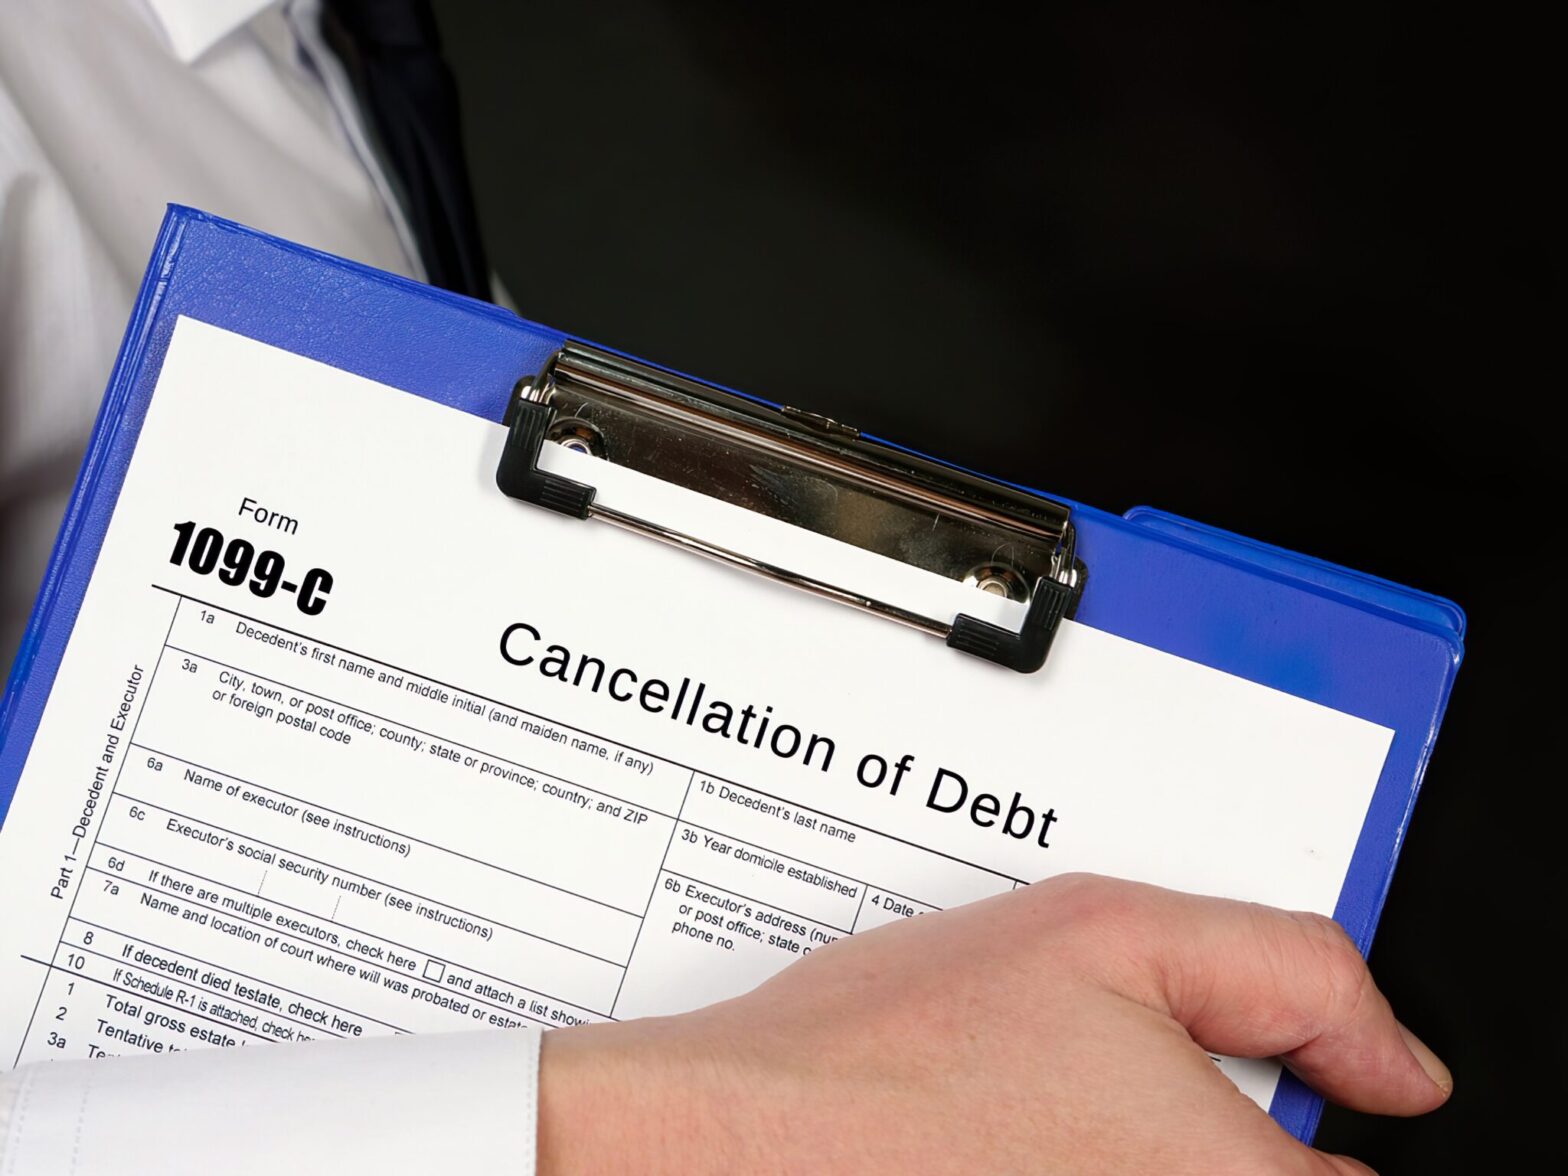 Everything to know about 1099-C Cancellation of Debt